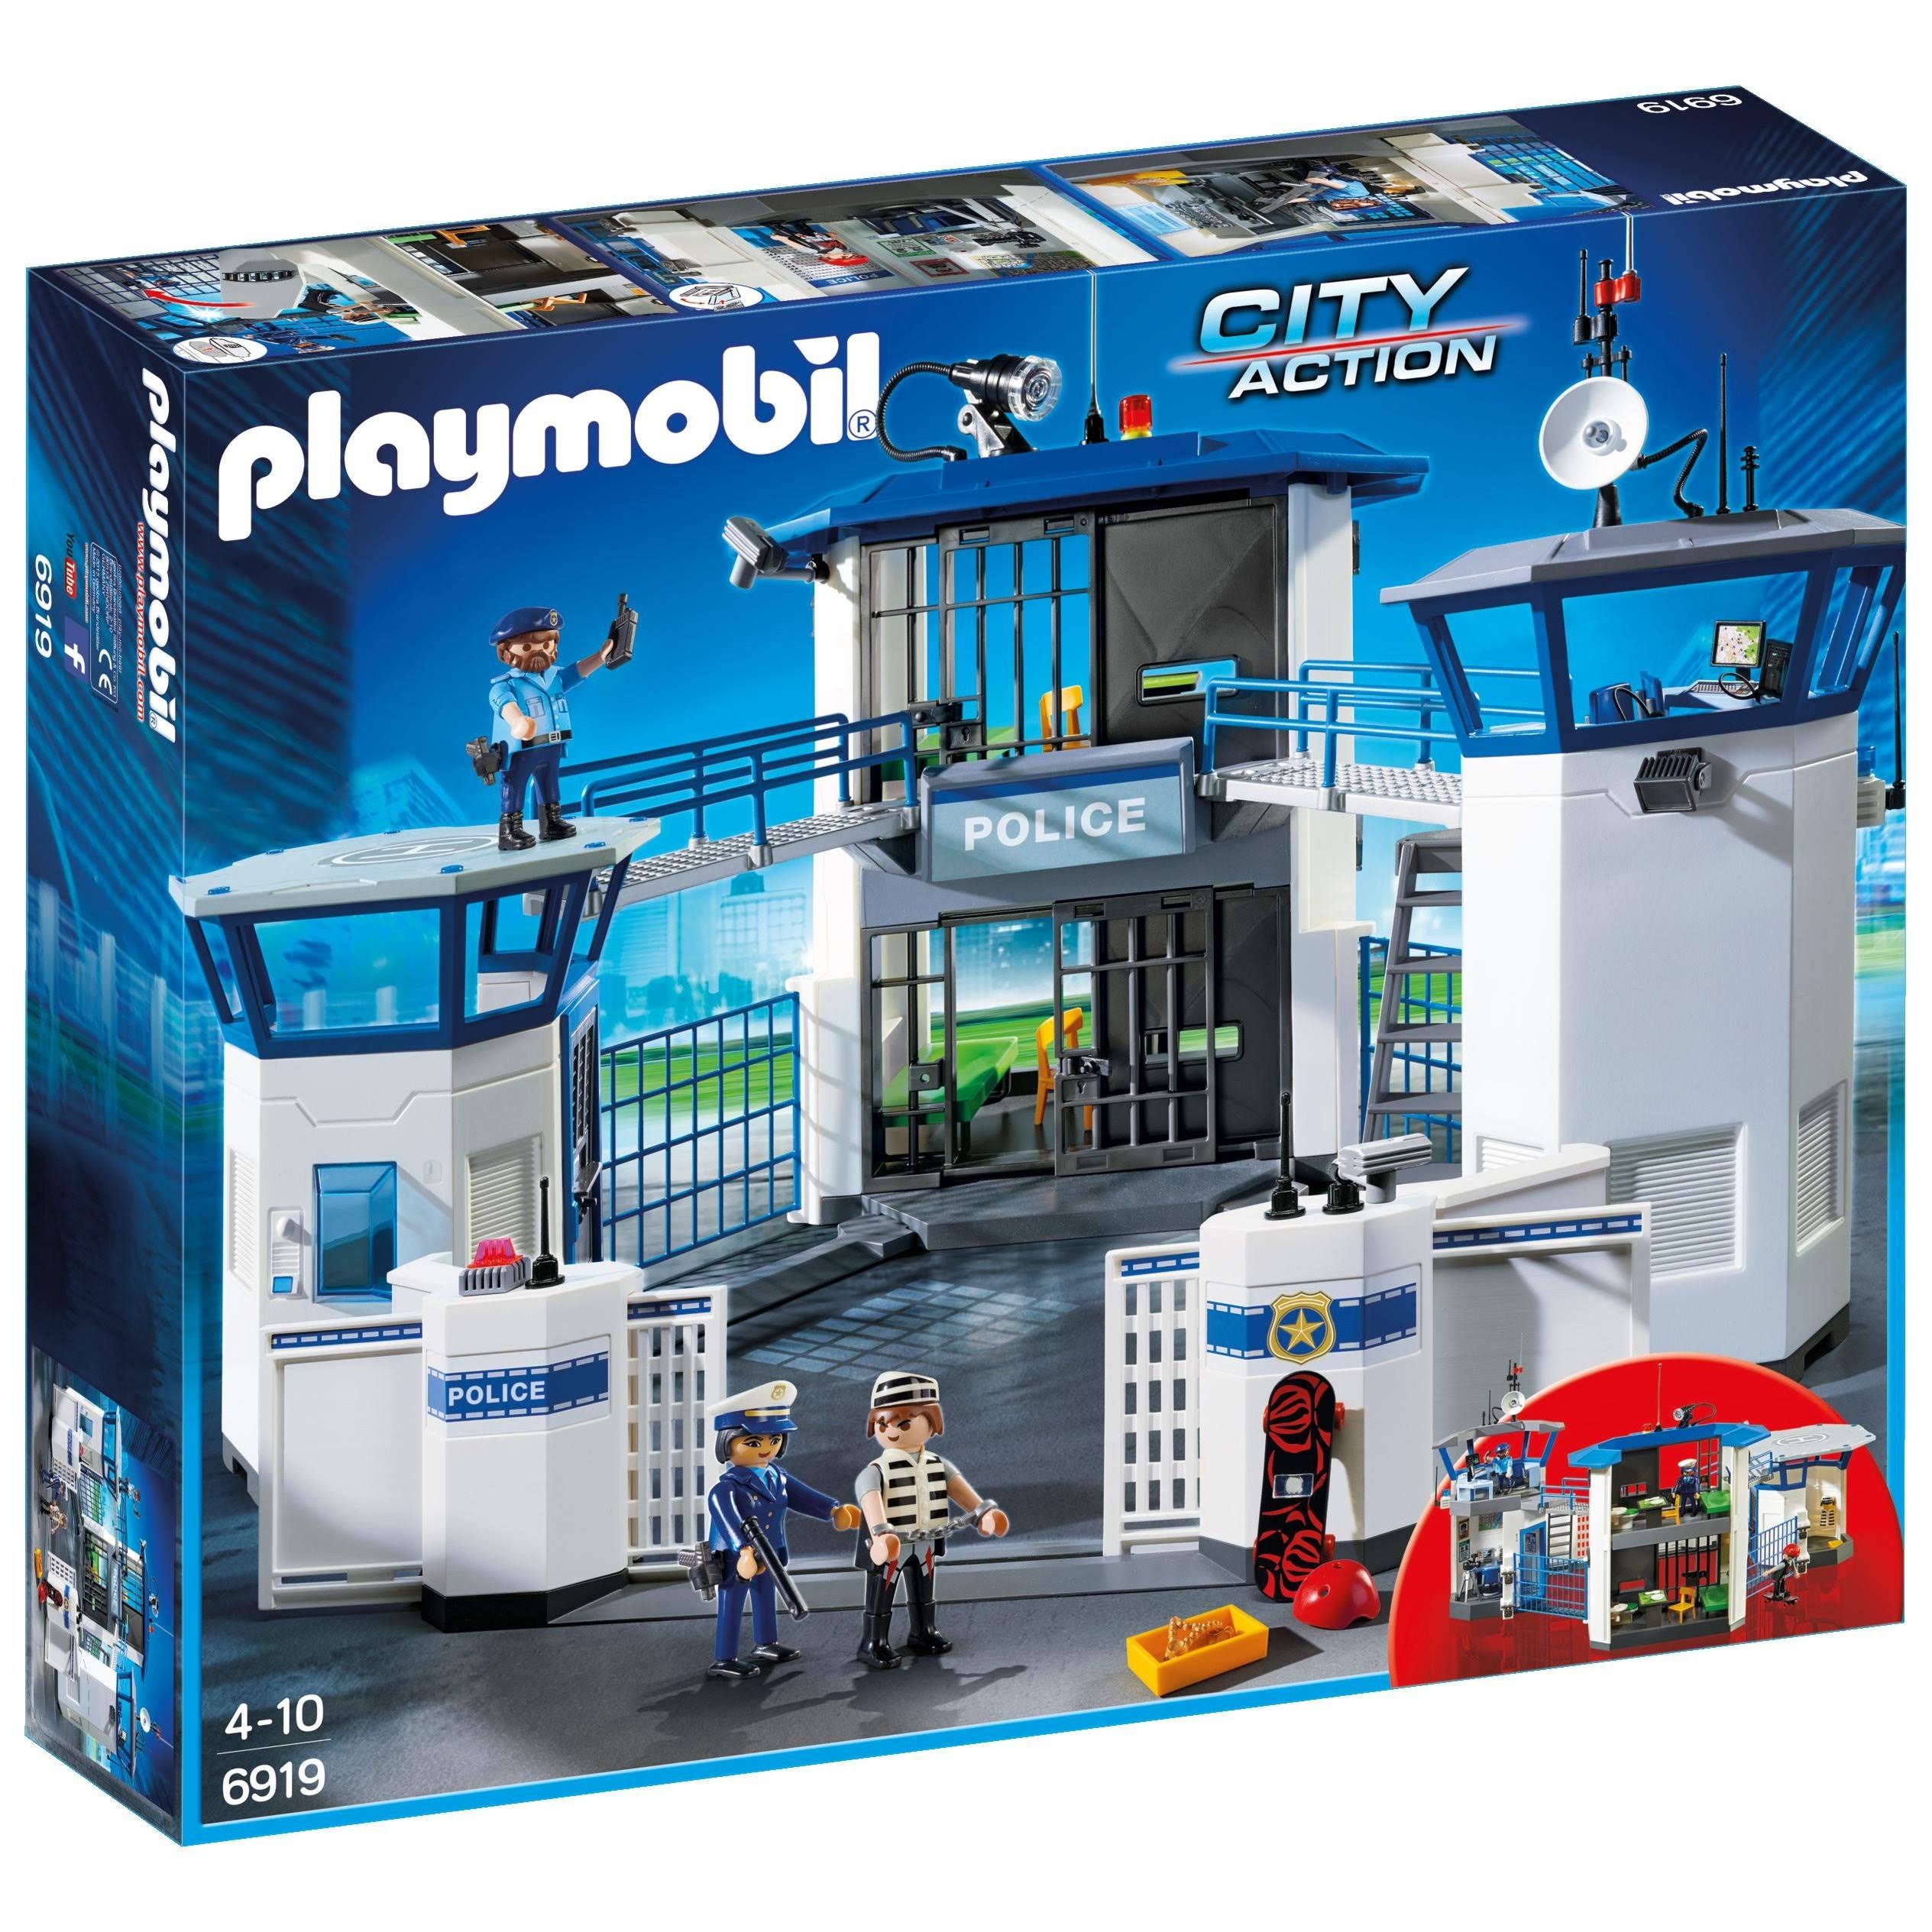 Playmobil City Action Police Station Play Set - 23" x 19.7"